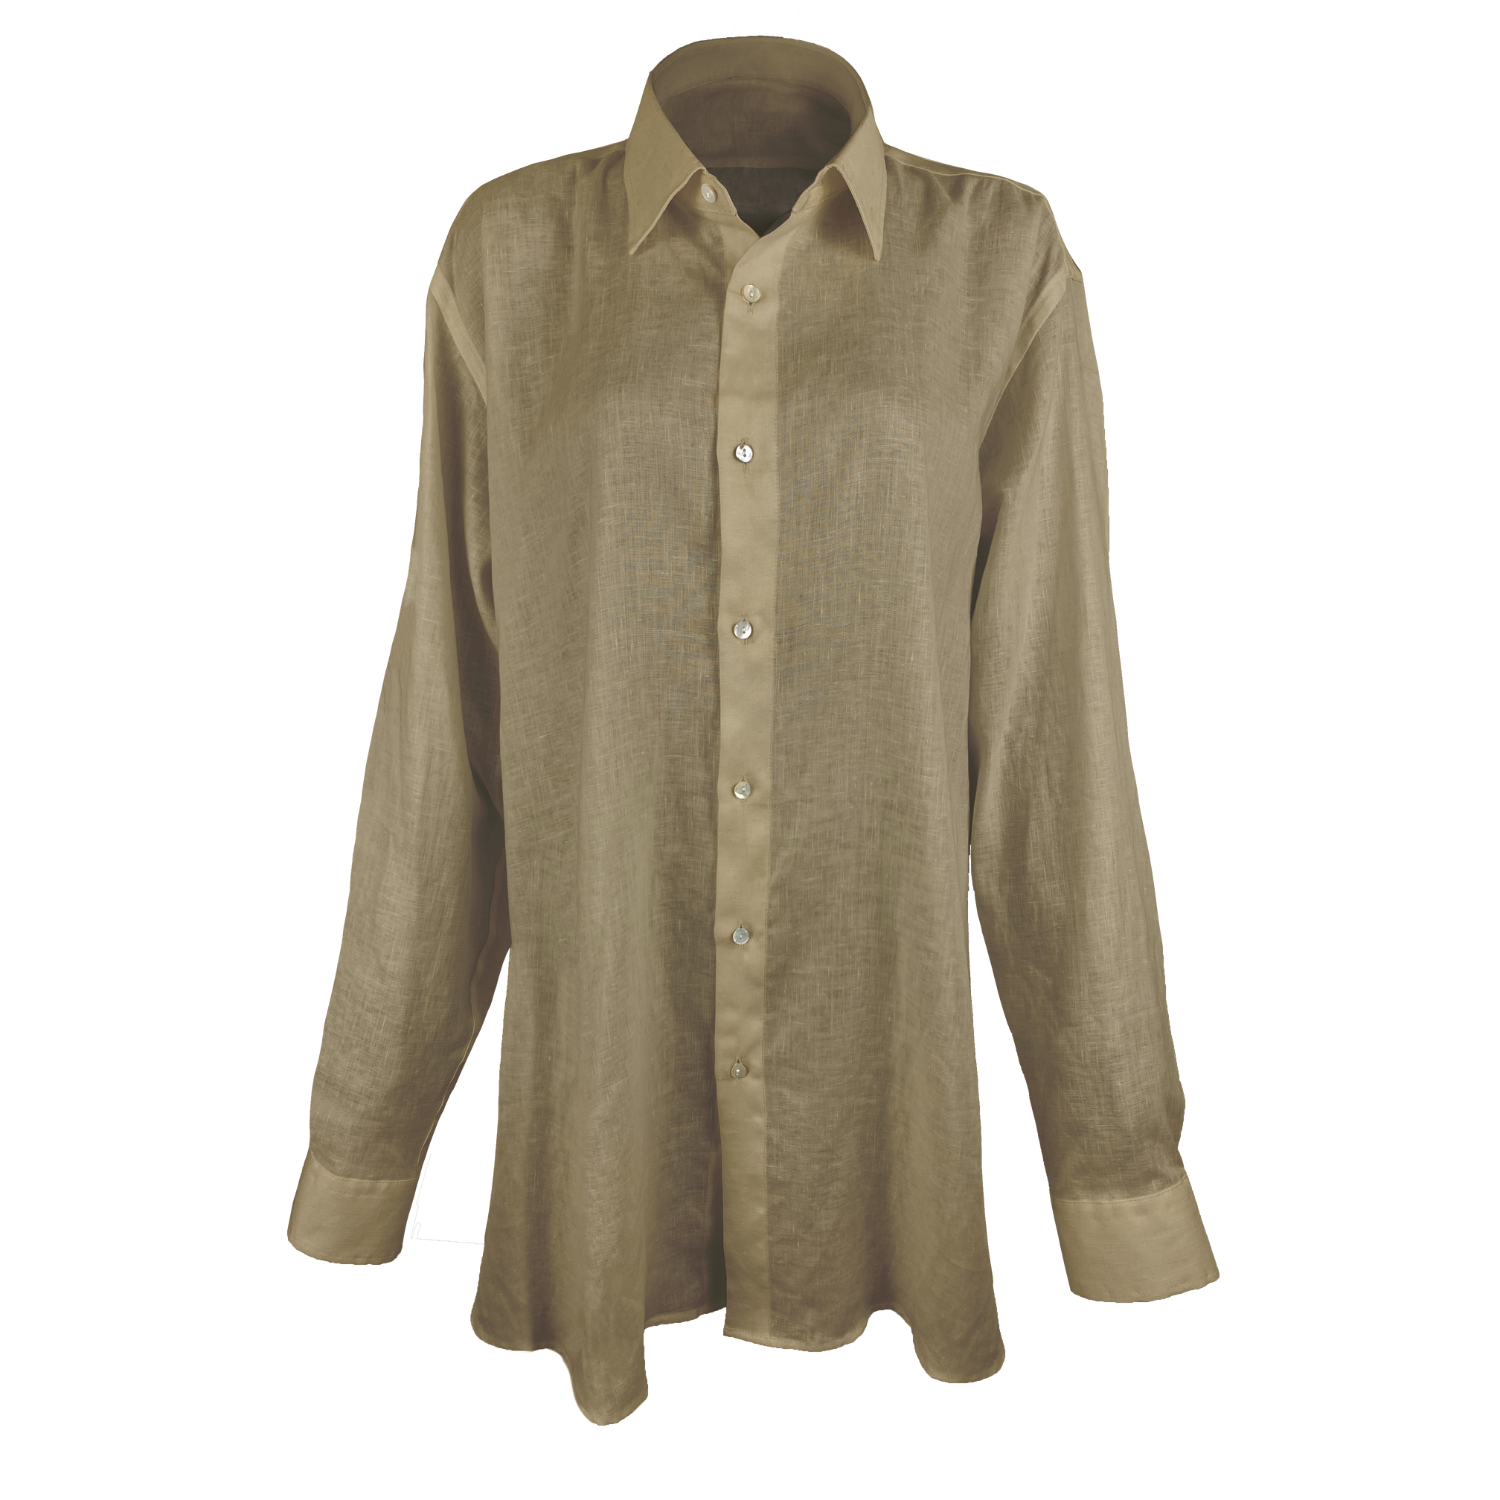 Oversized Button Down in Camel (Pre-Order)